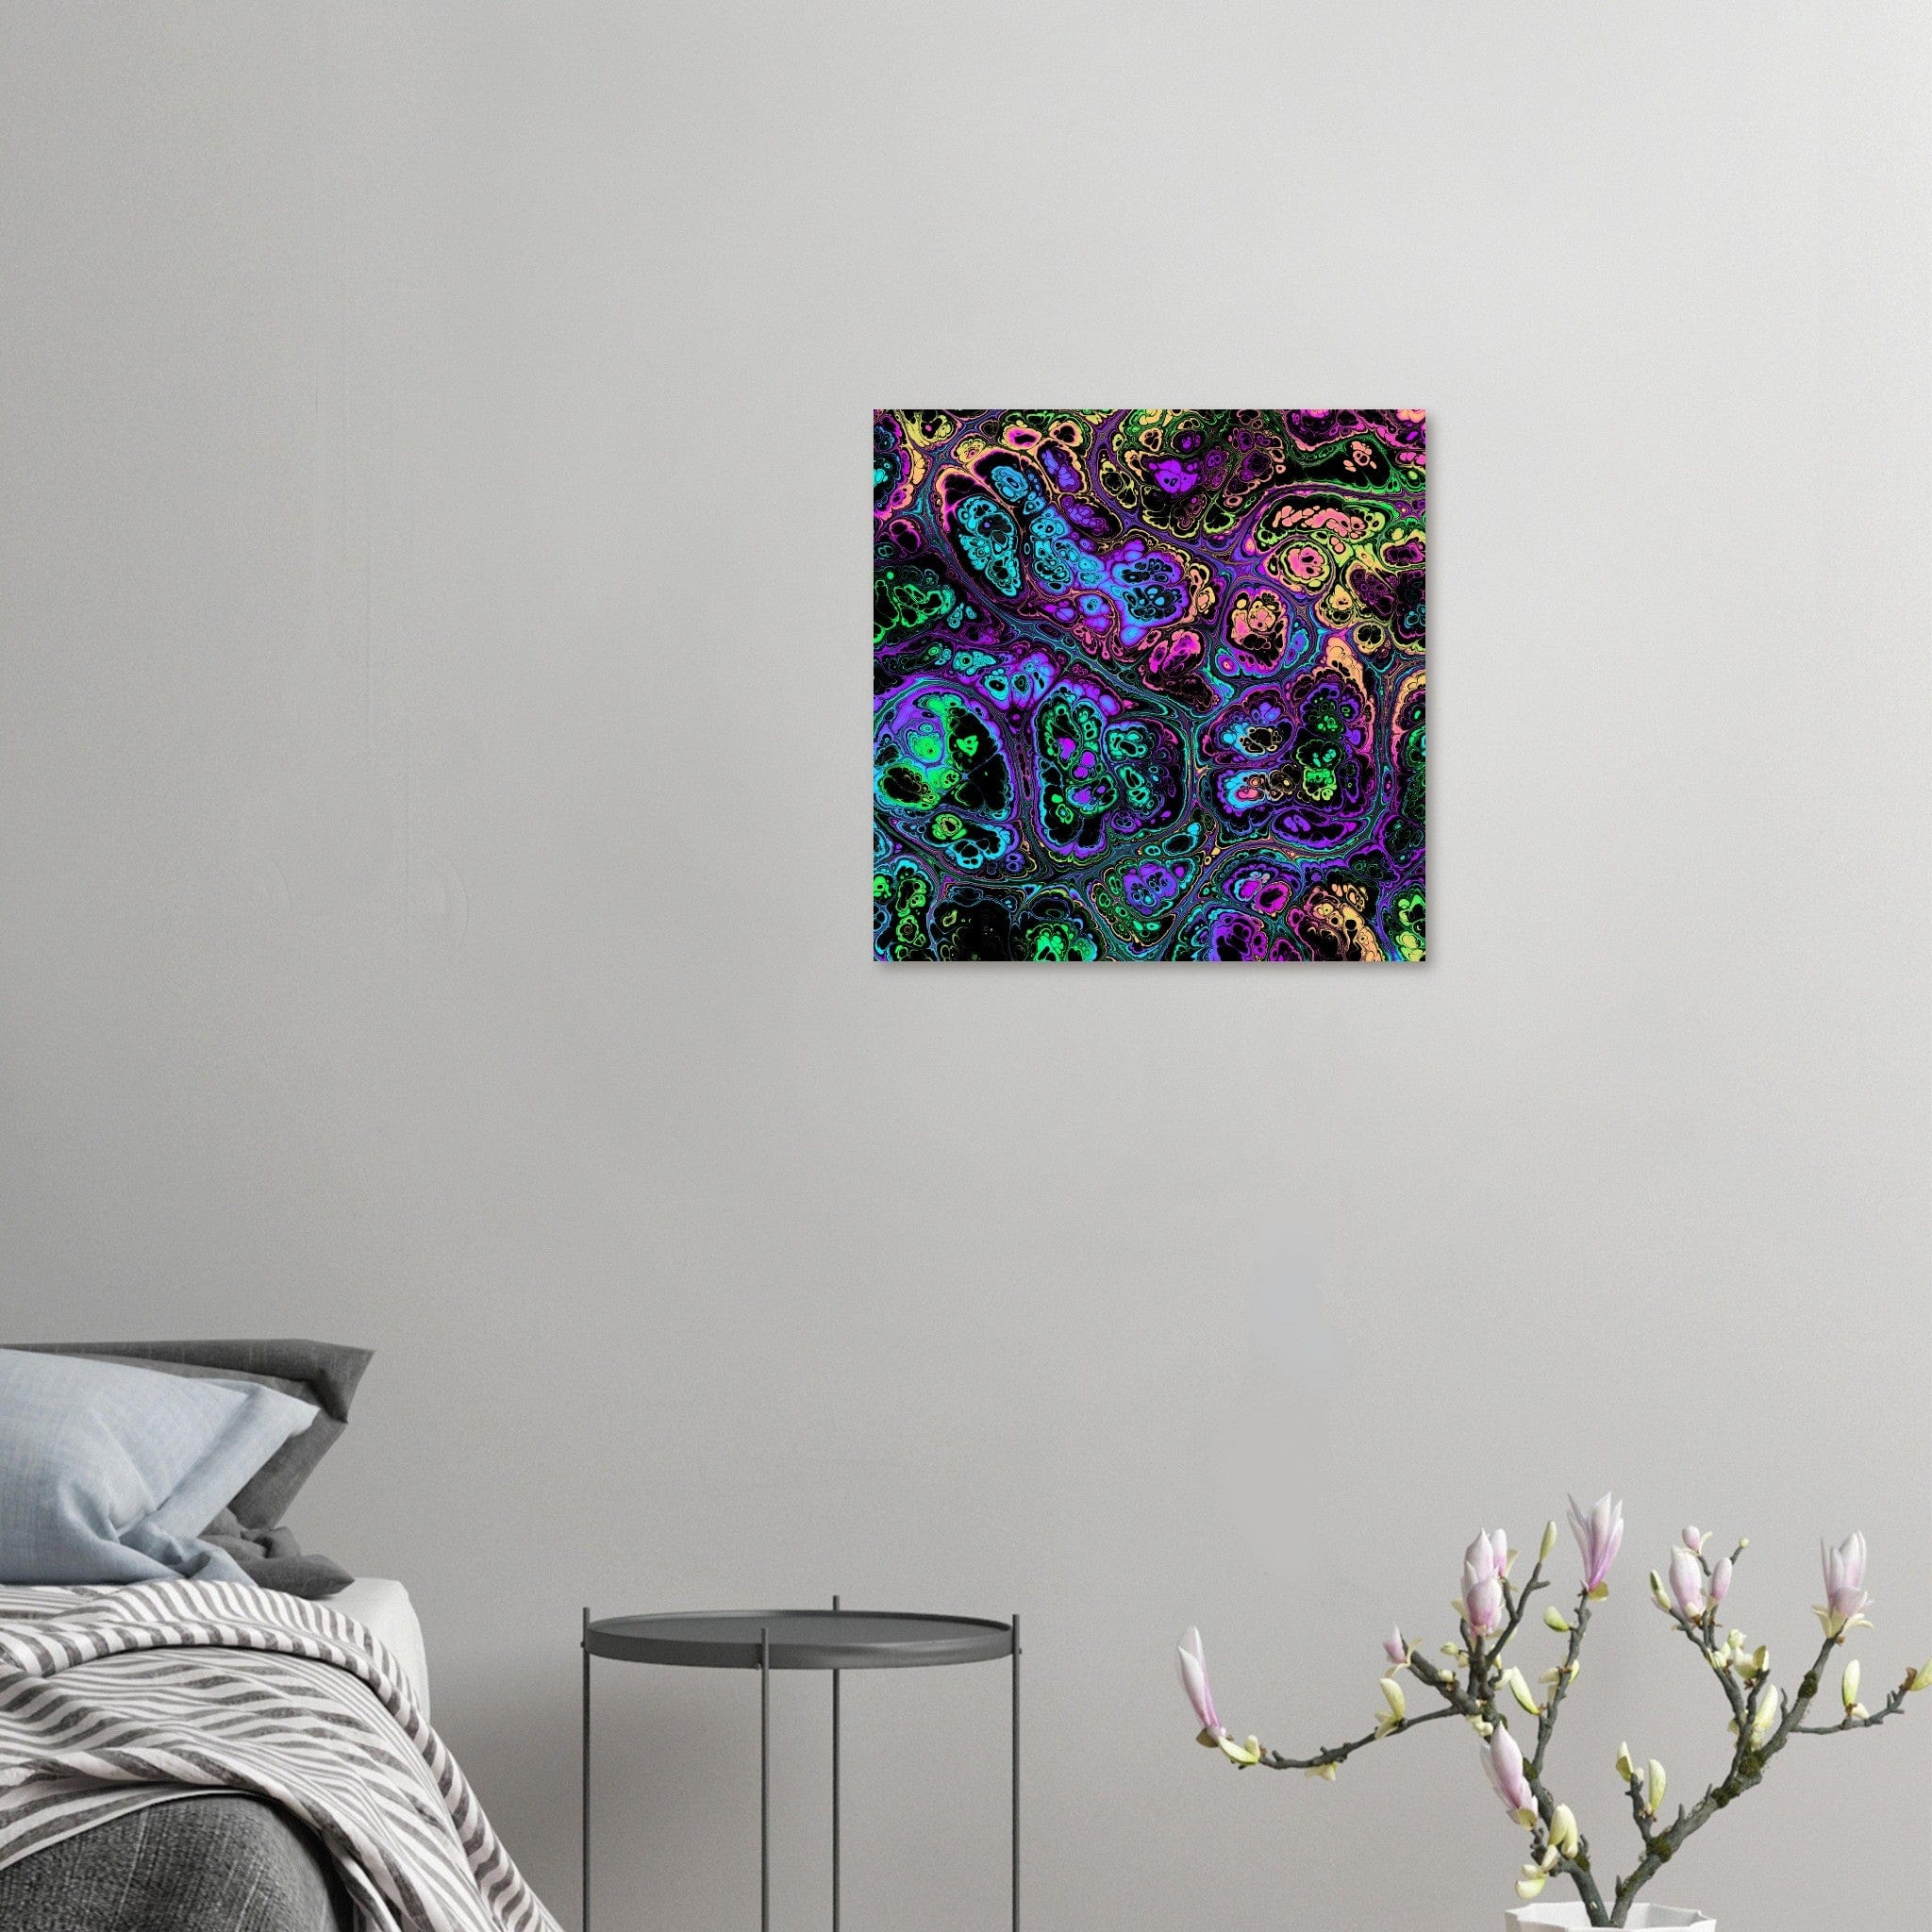 Little Squiffy Print Material 50x50 cm / 20x20″ / Vertical Neon Psychedelic Marble Aluminum Print Wall Art